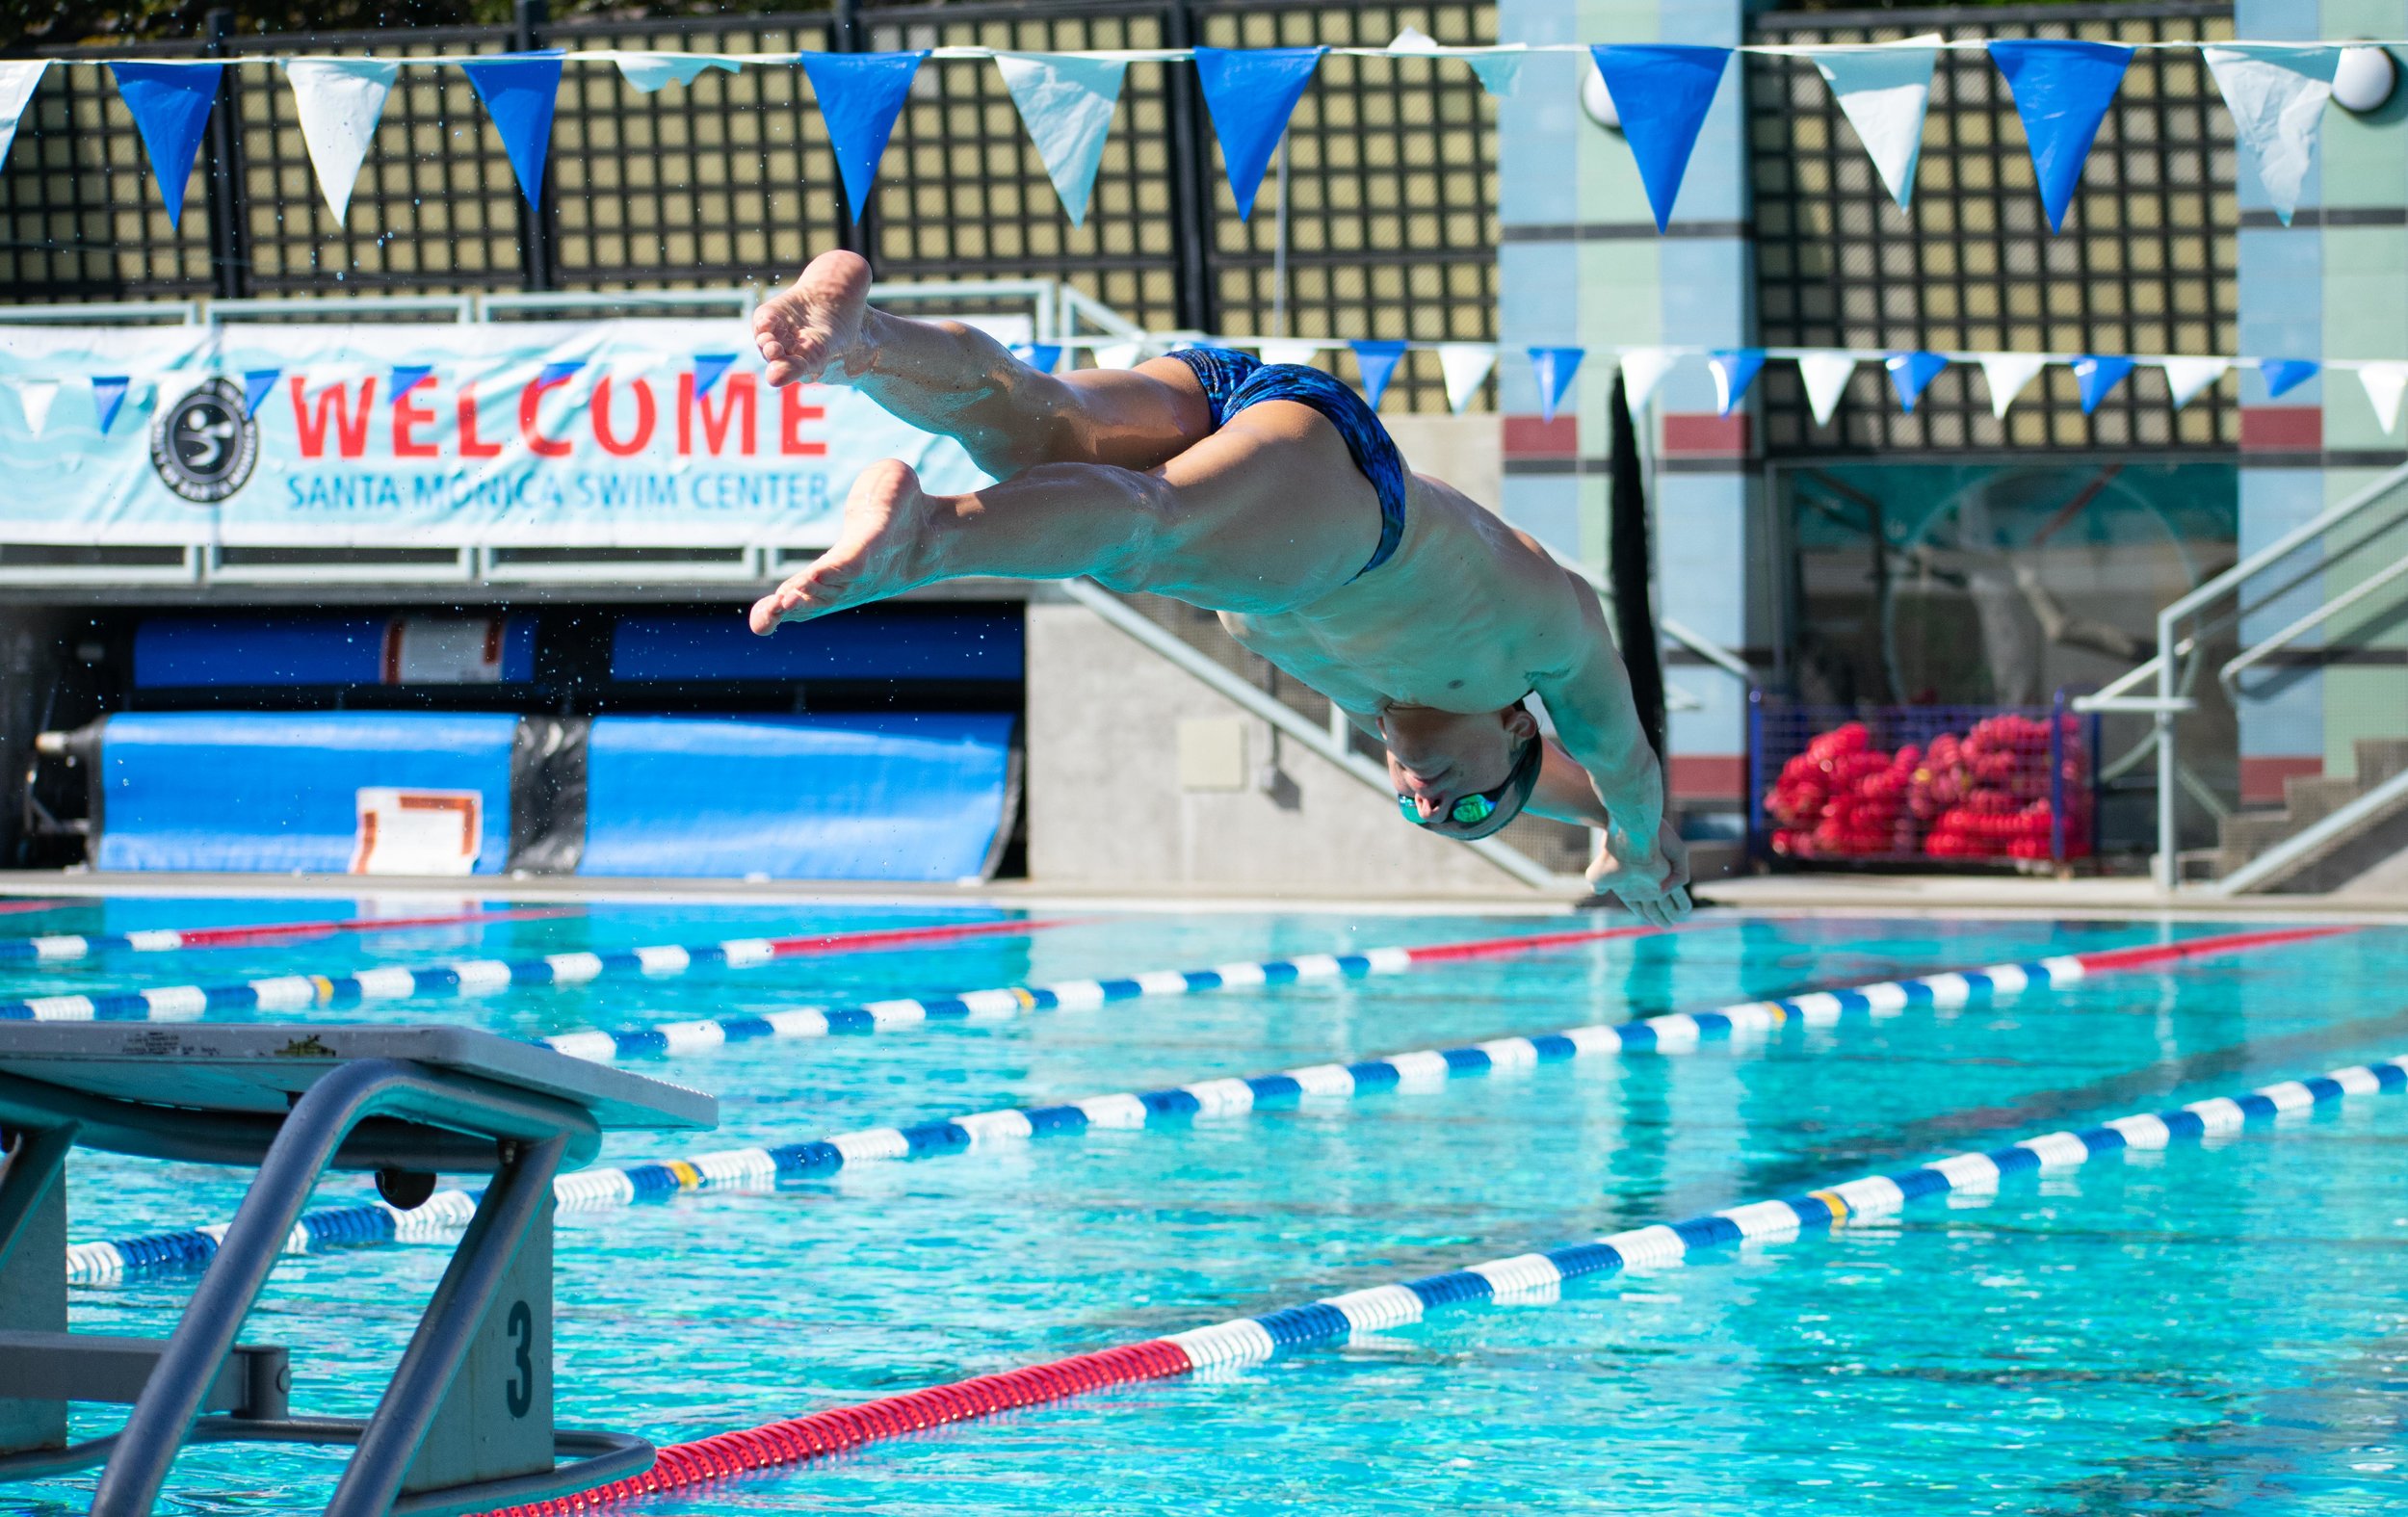  Martin Berggren, a sophomore for the Santa Monica College’s swim team, practices on Wednesday, April 11 during their daily trainings at the Santa Monica Swim Center in Santa Monica, California. The team is preparing for championships which will fini